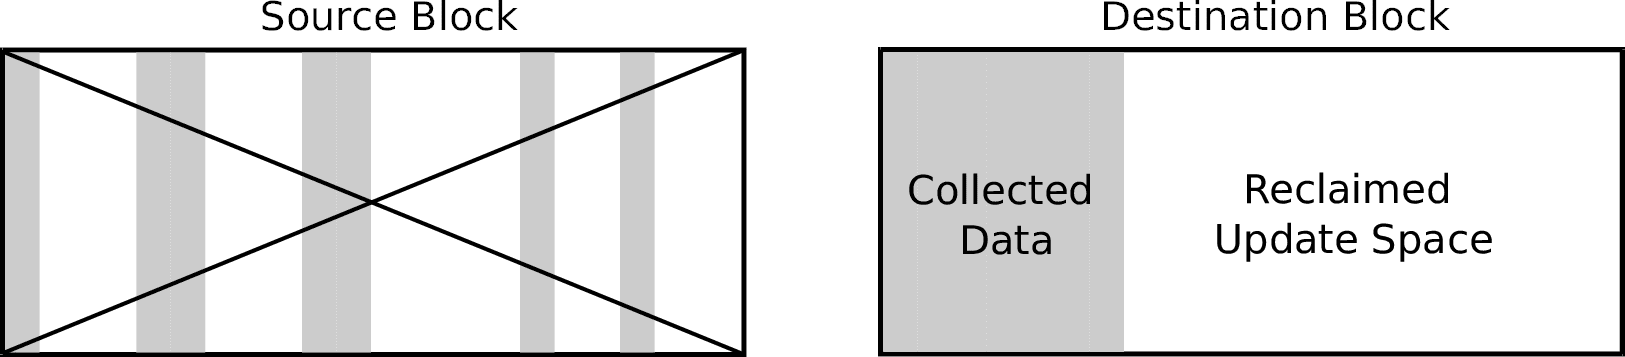 Representation of the consolidation of valid pages as part of a Flash File System or Flash Translation Layer (FTL) garbage collection process.